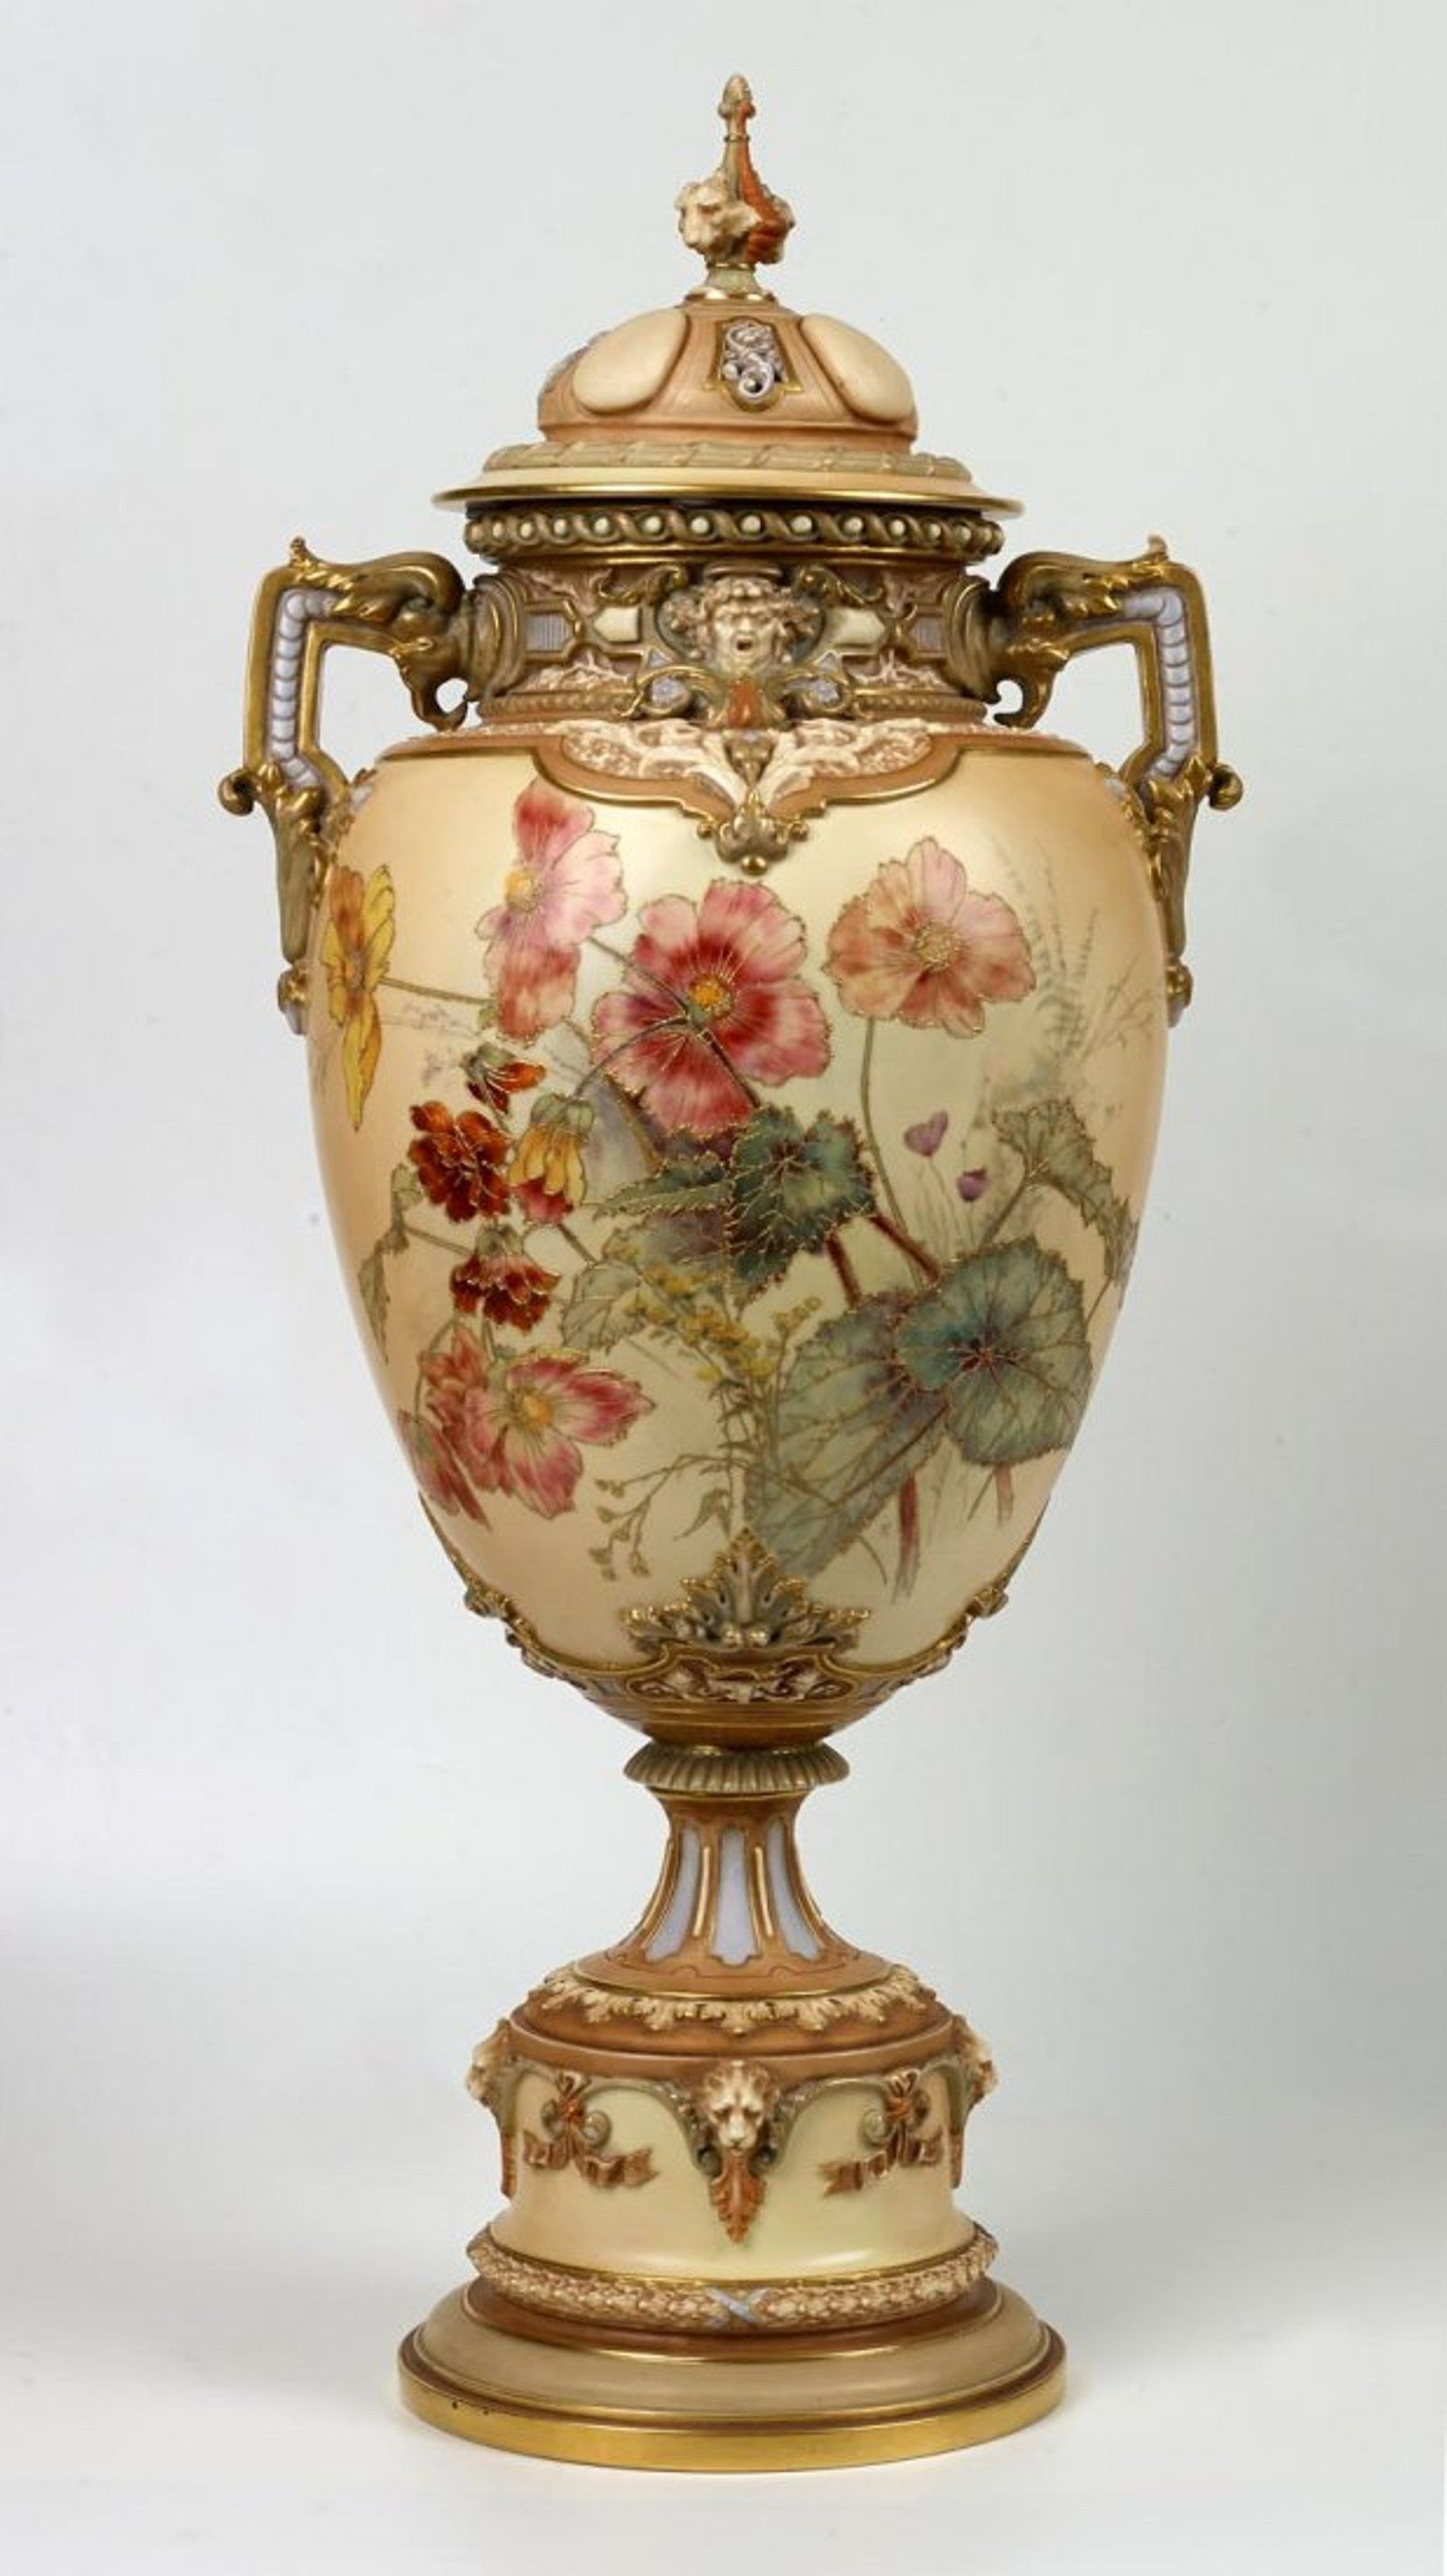 19 Recommended Hand Painted Satsuma Vase 2024 free download hand painted satsuma vase of large urn vase images antiques gifts wonderful large antique within large urn vase stock a large royal worcester covered urn english circa 1894 of large urn